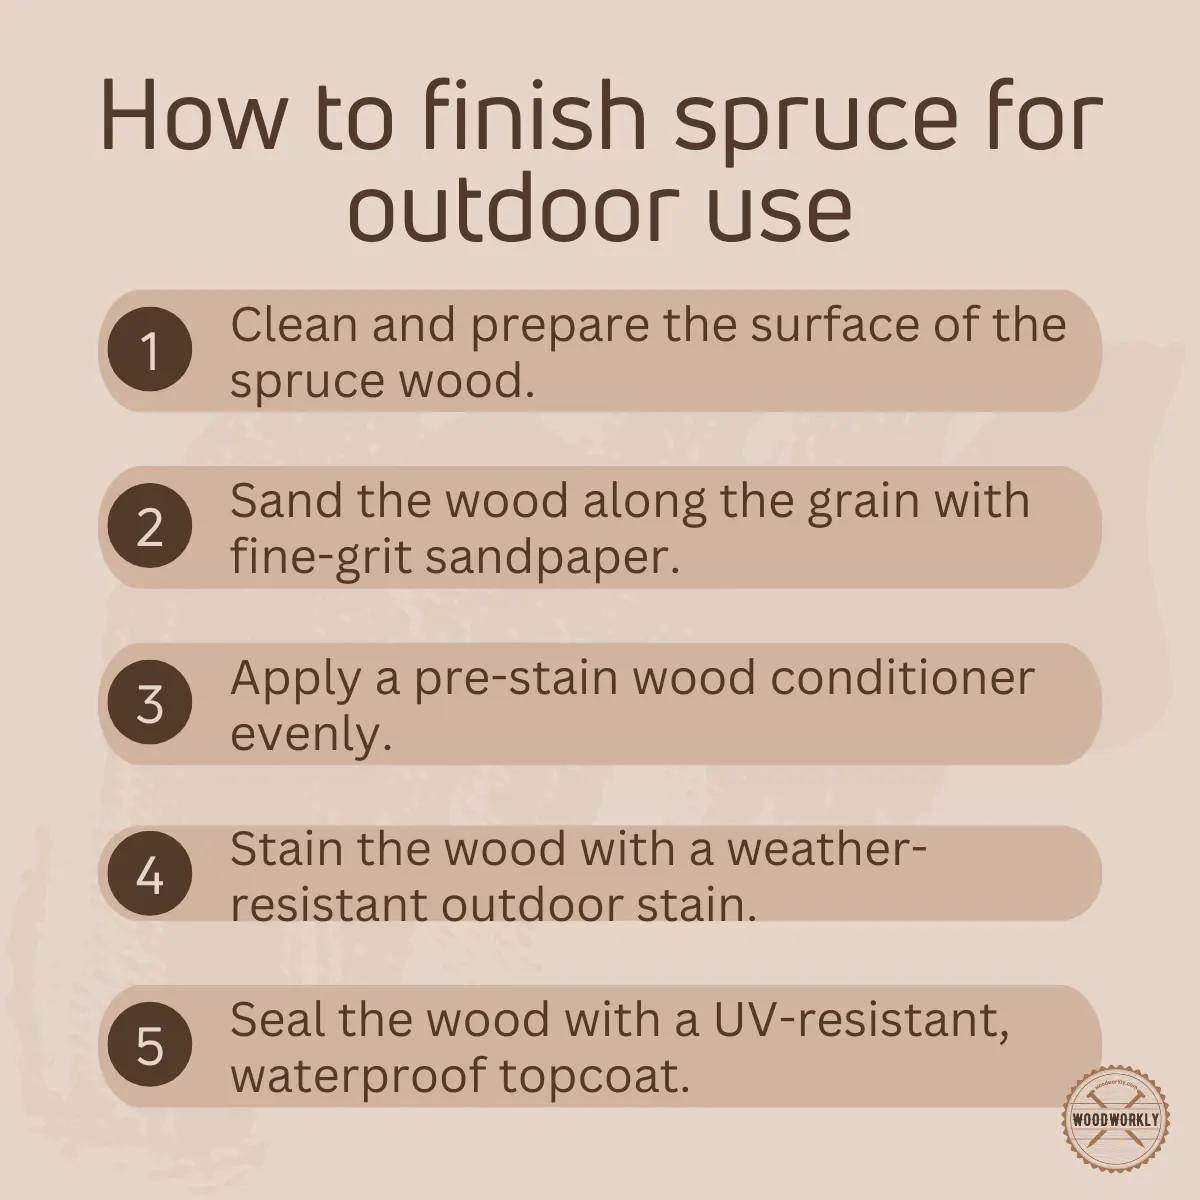 How to finish spruce for outdoor use